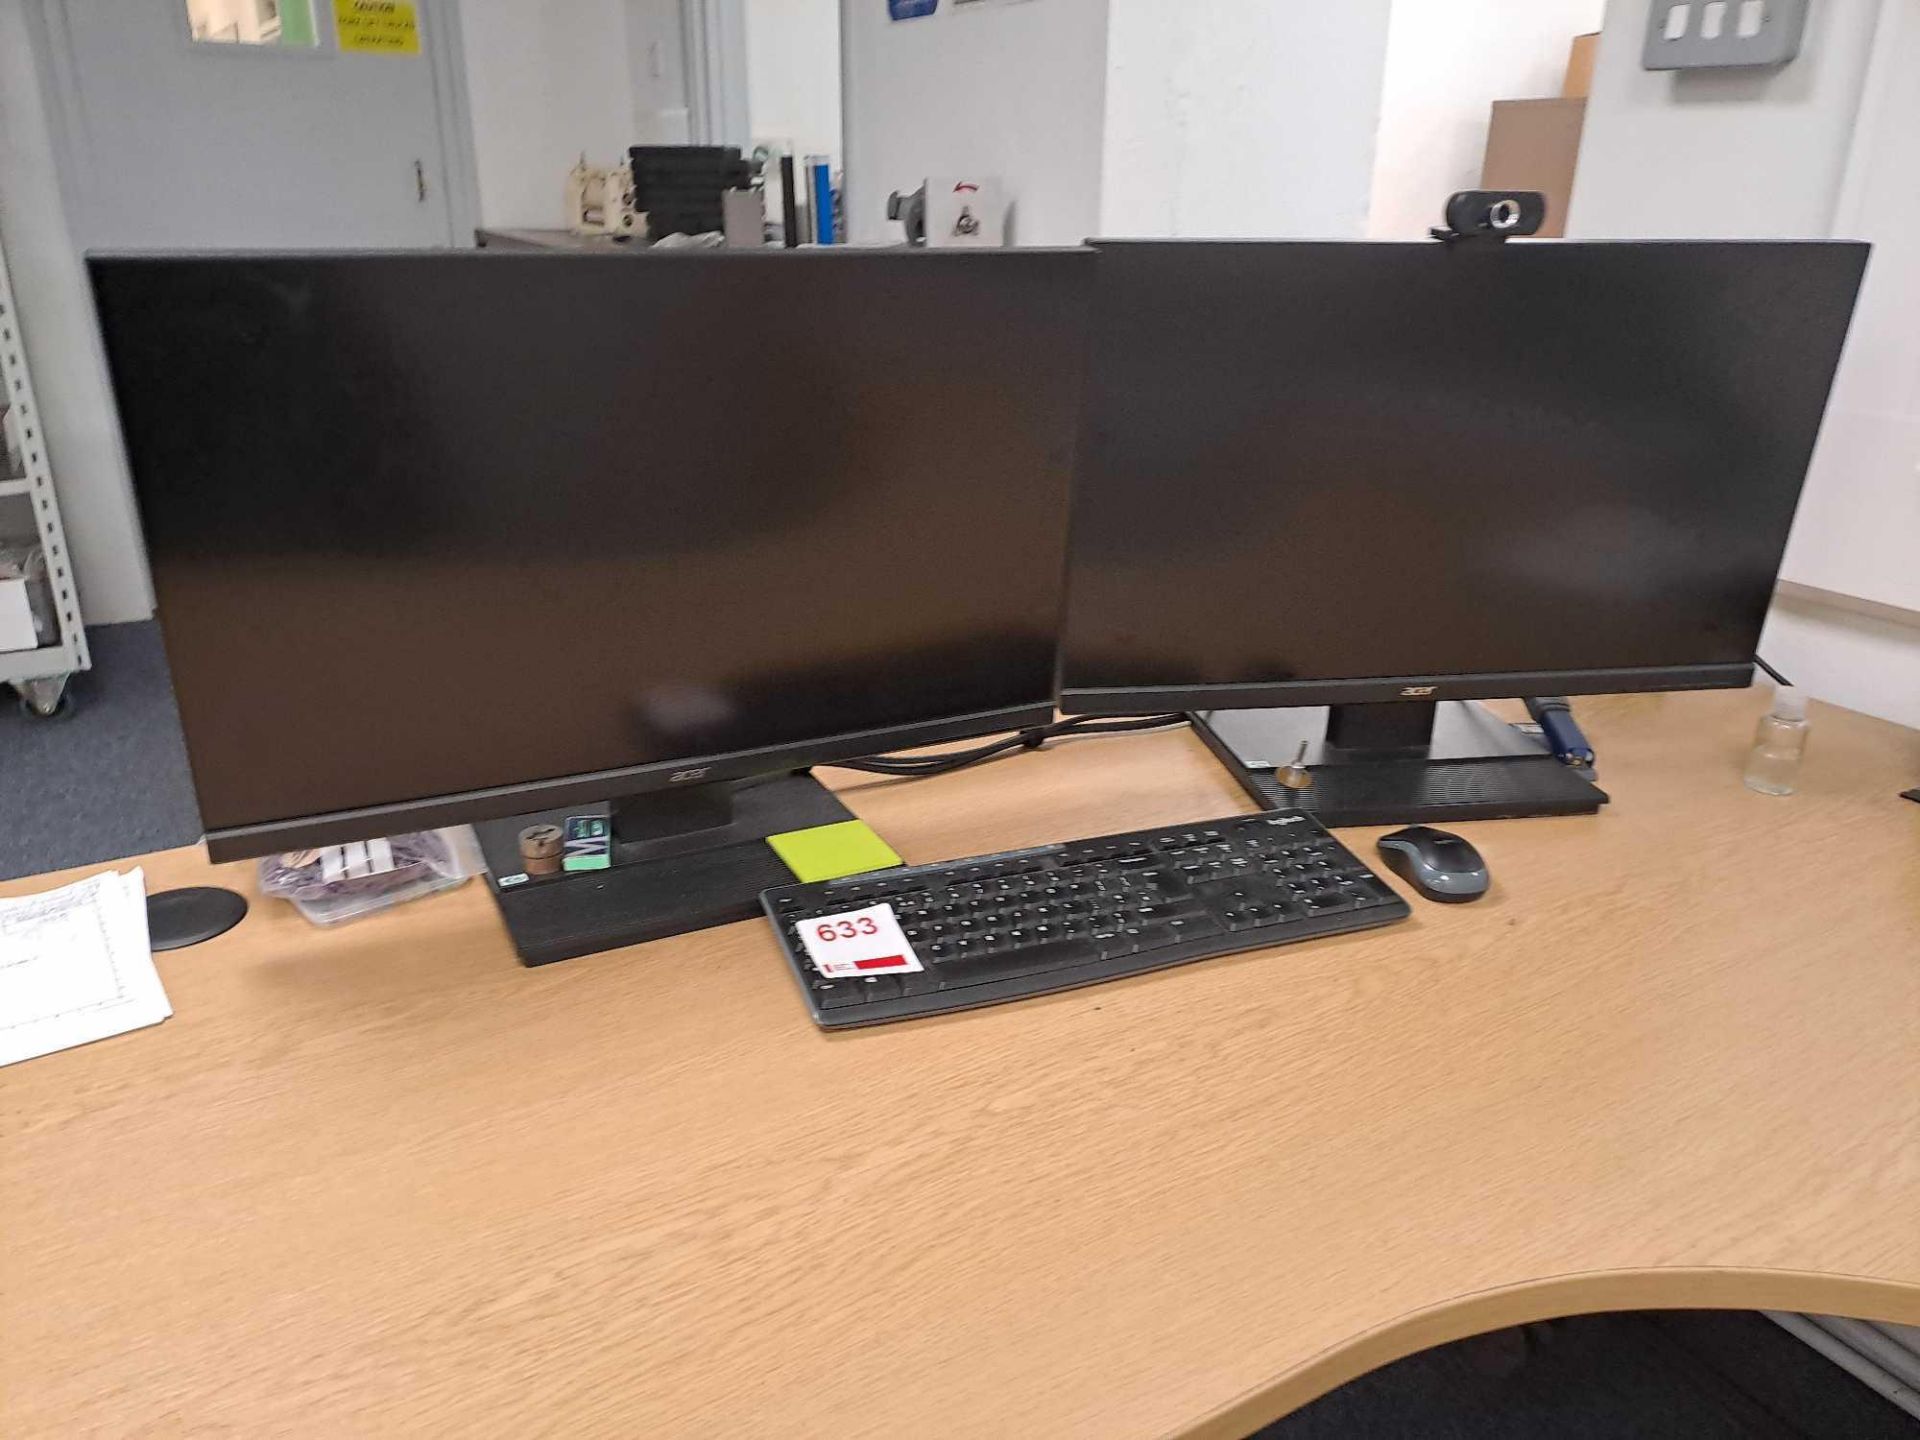 Two Acer monitors, with keyboard & mouse